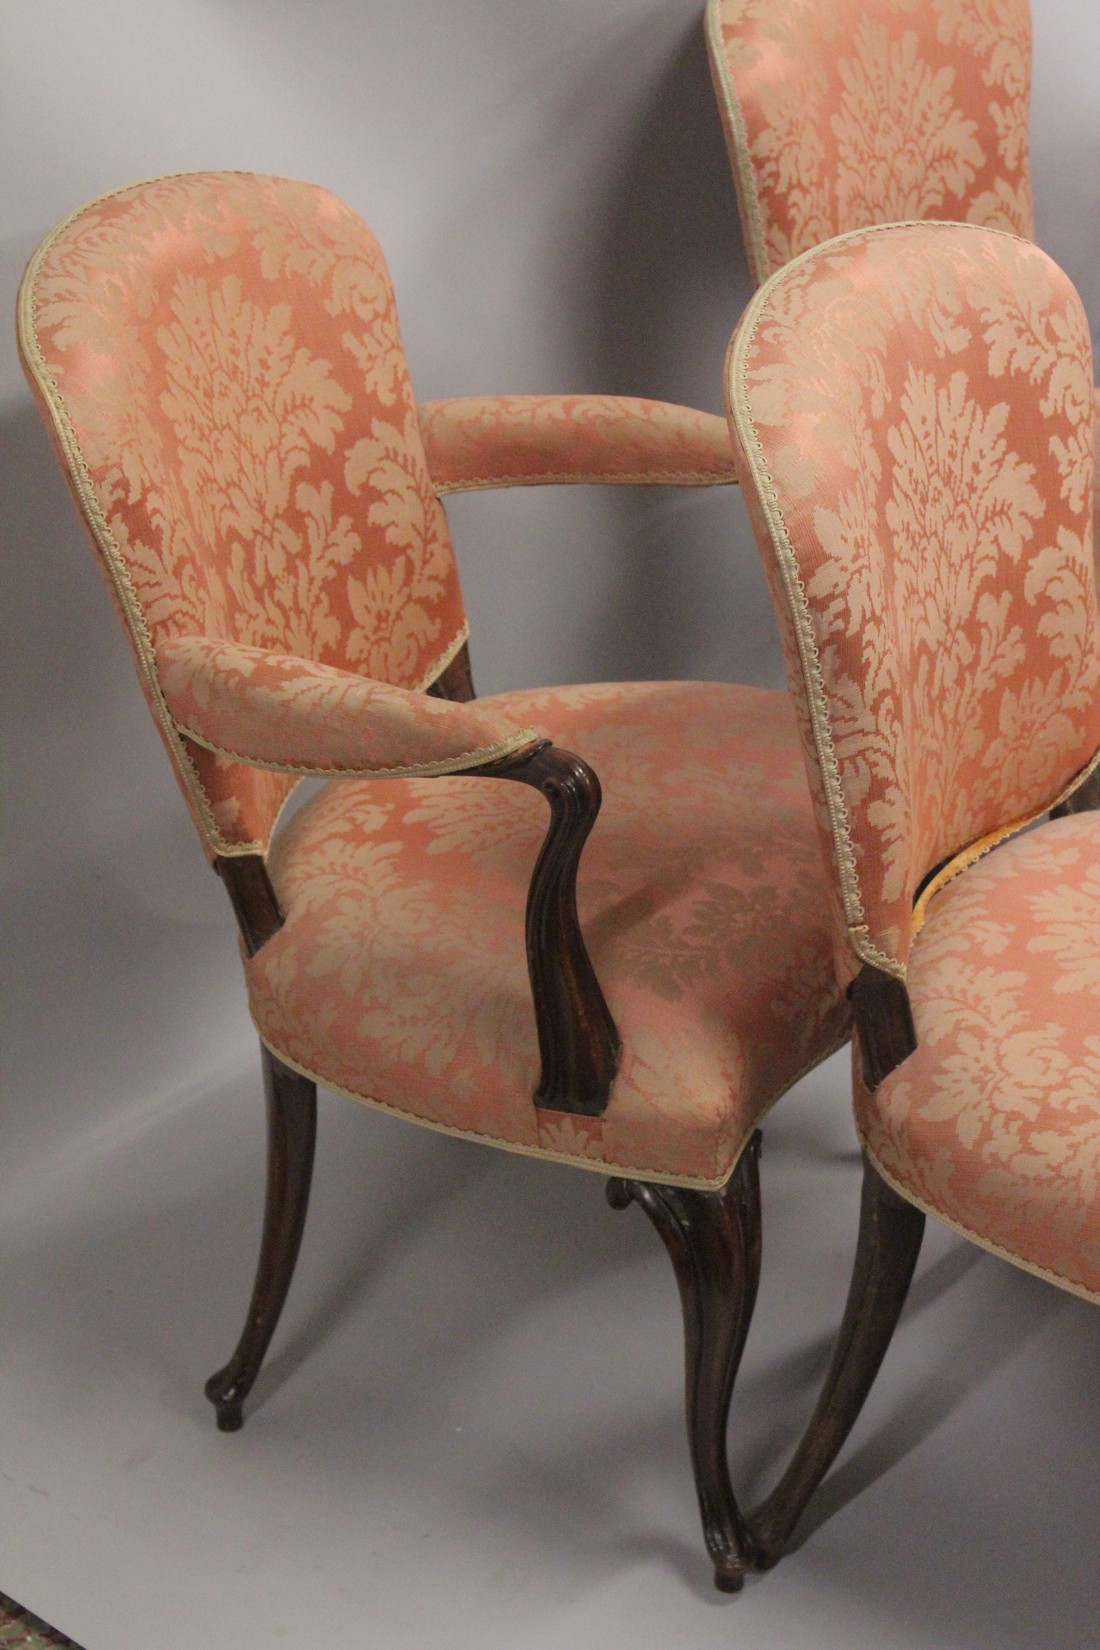 A SUPERB SET OF TEN 19TH CENTURY HEPPLEWHITE DINING CHAIRS, two with arms, with padded seats and - Image 4 of 4